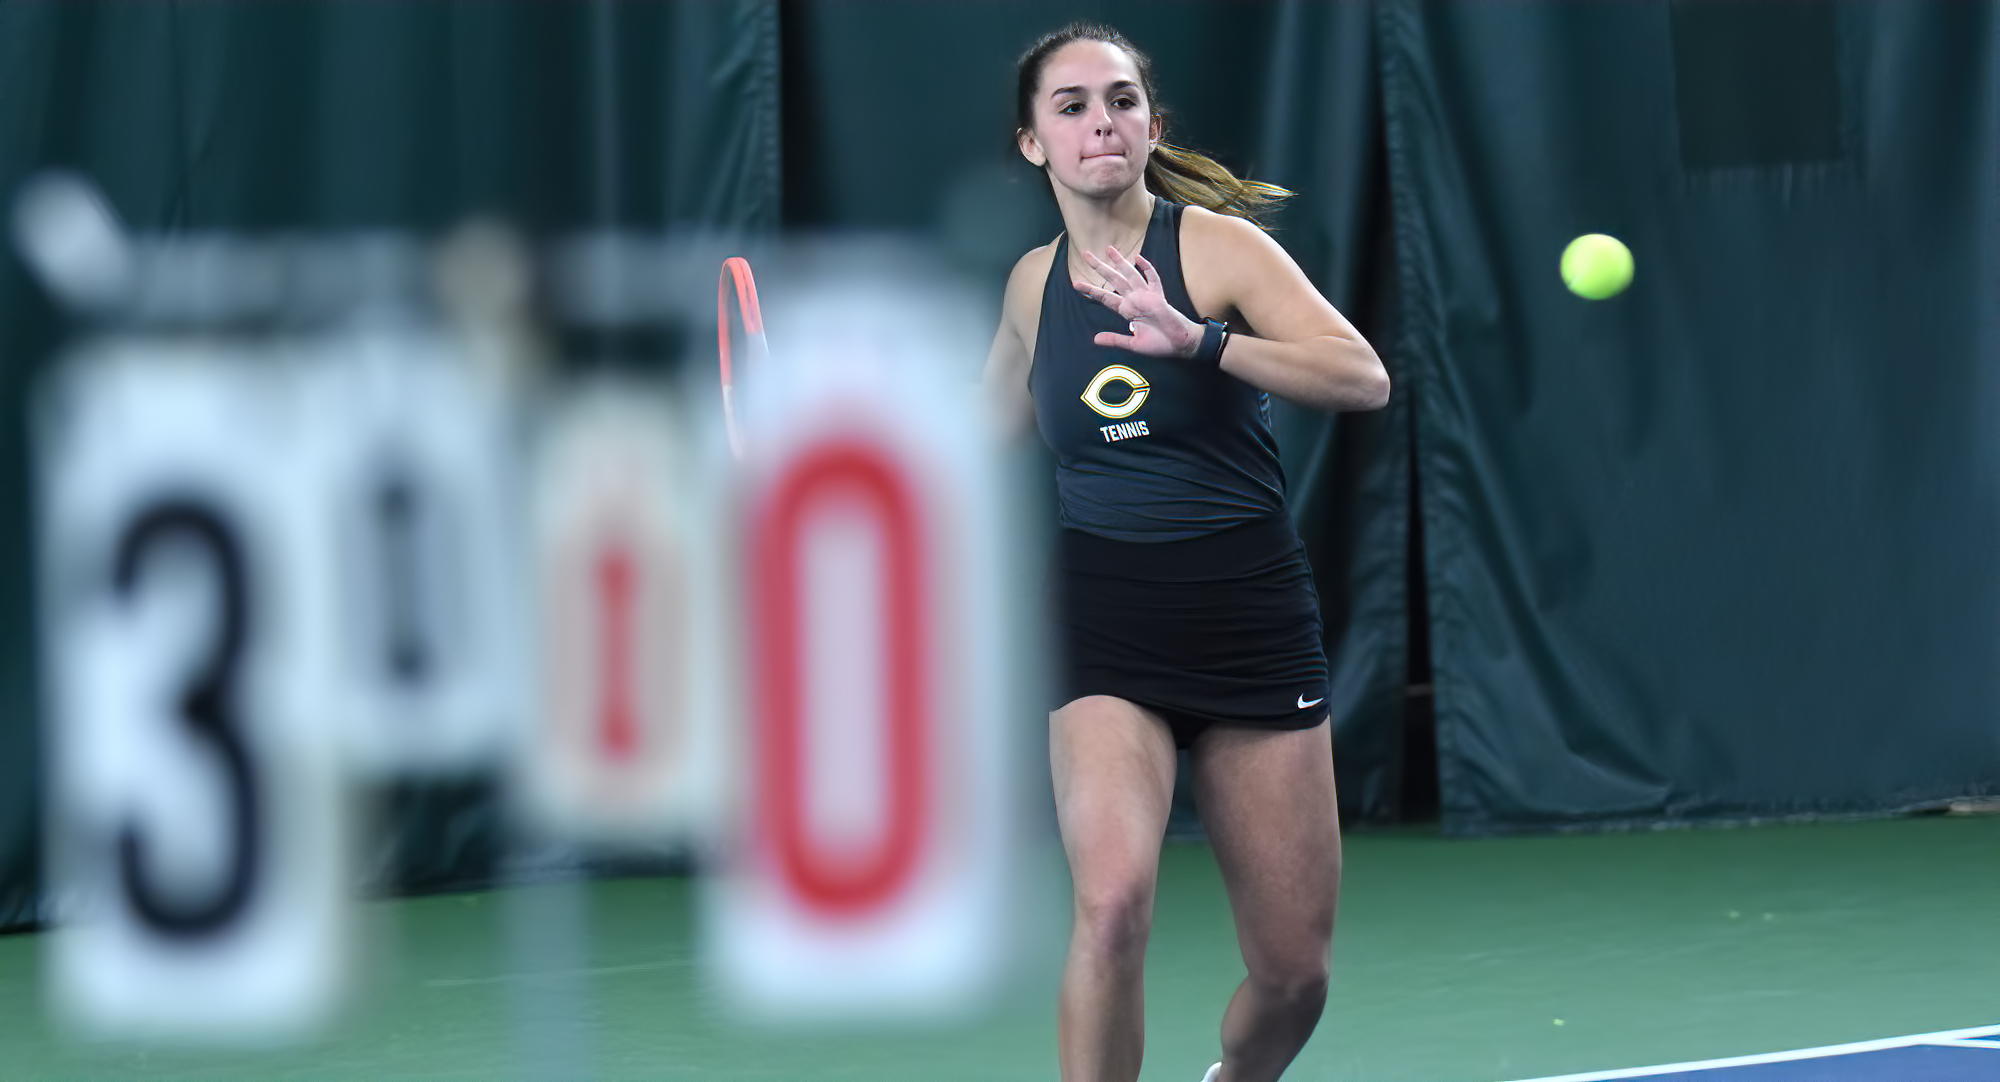 Freshman Julia Wolf goes for the forehand winner in her match at No.6 singles. She won 6-4, 7-5 and is now 2-1 in singles play this year.